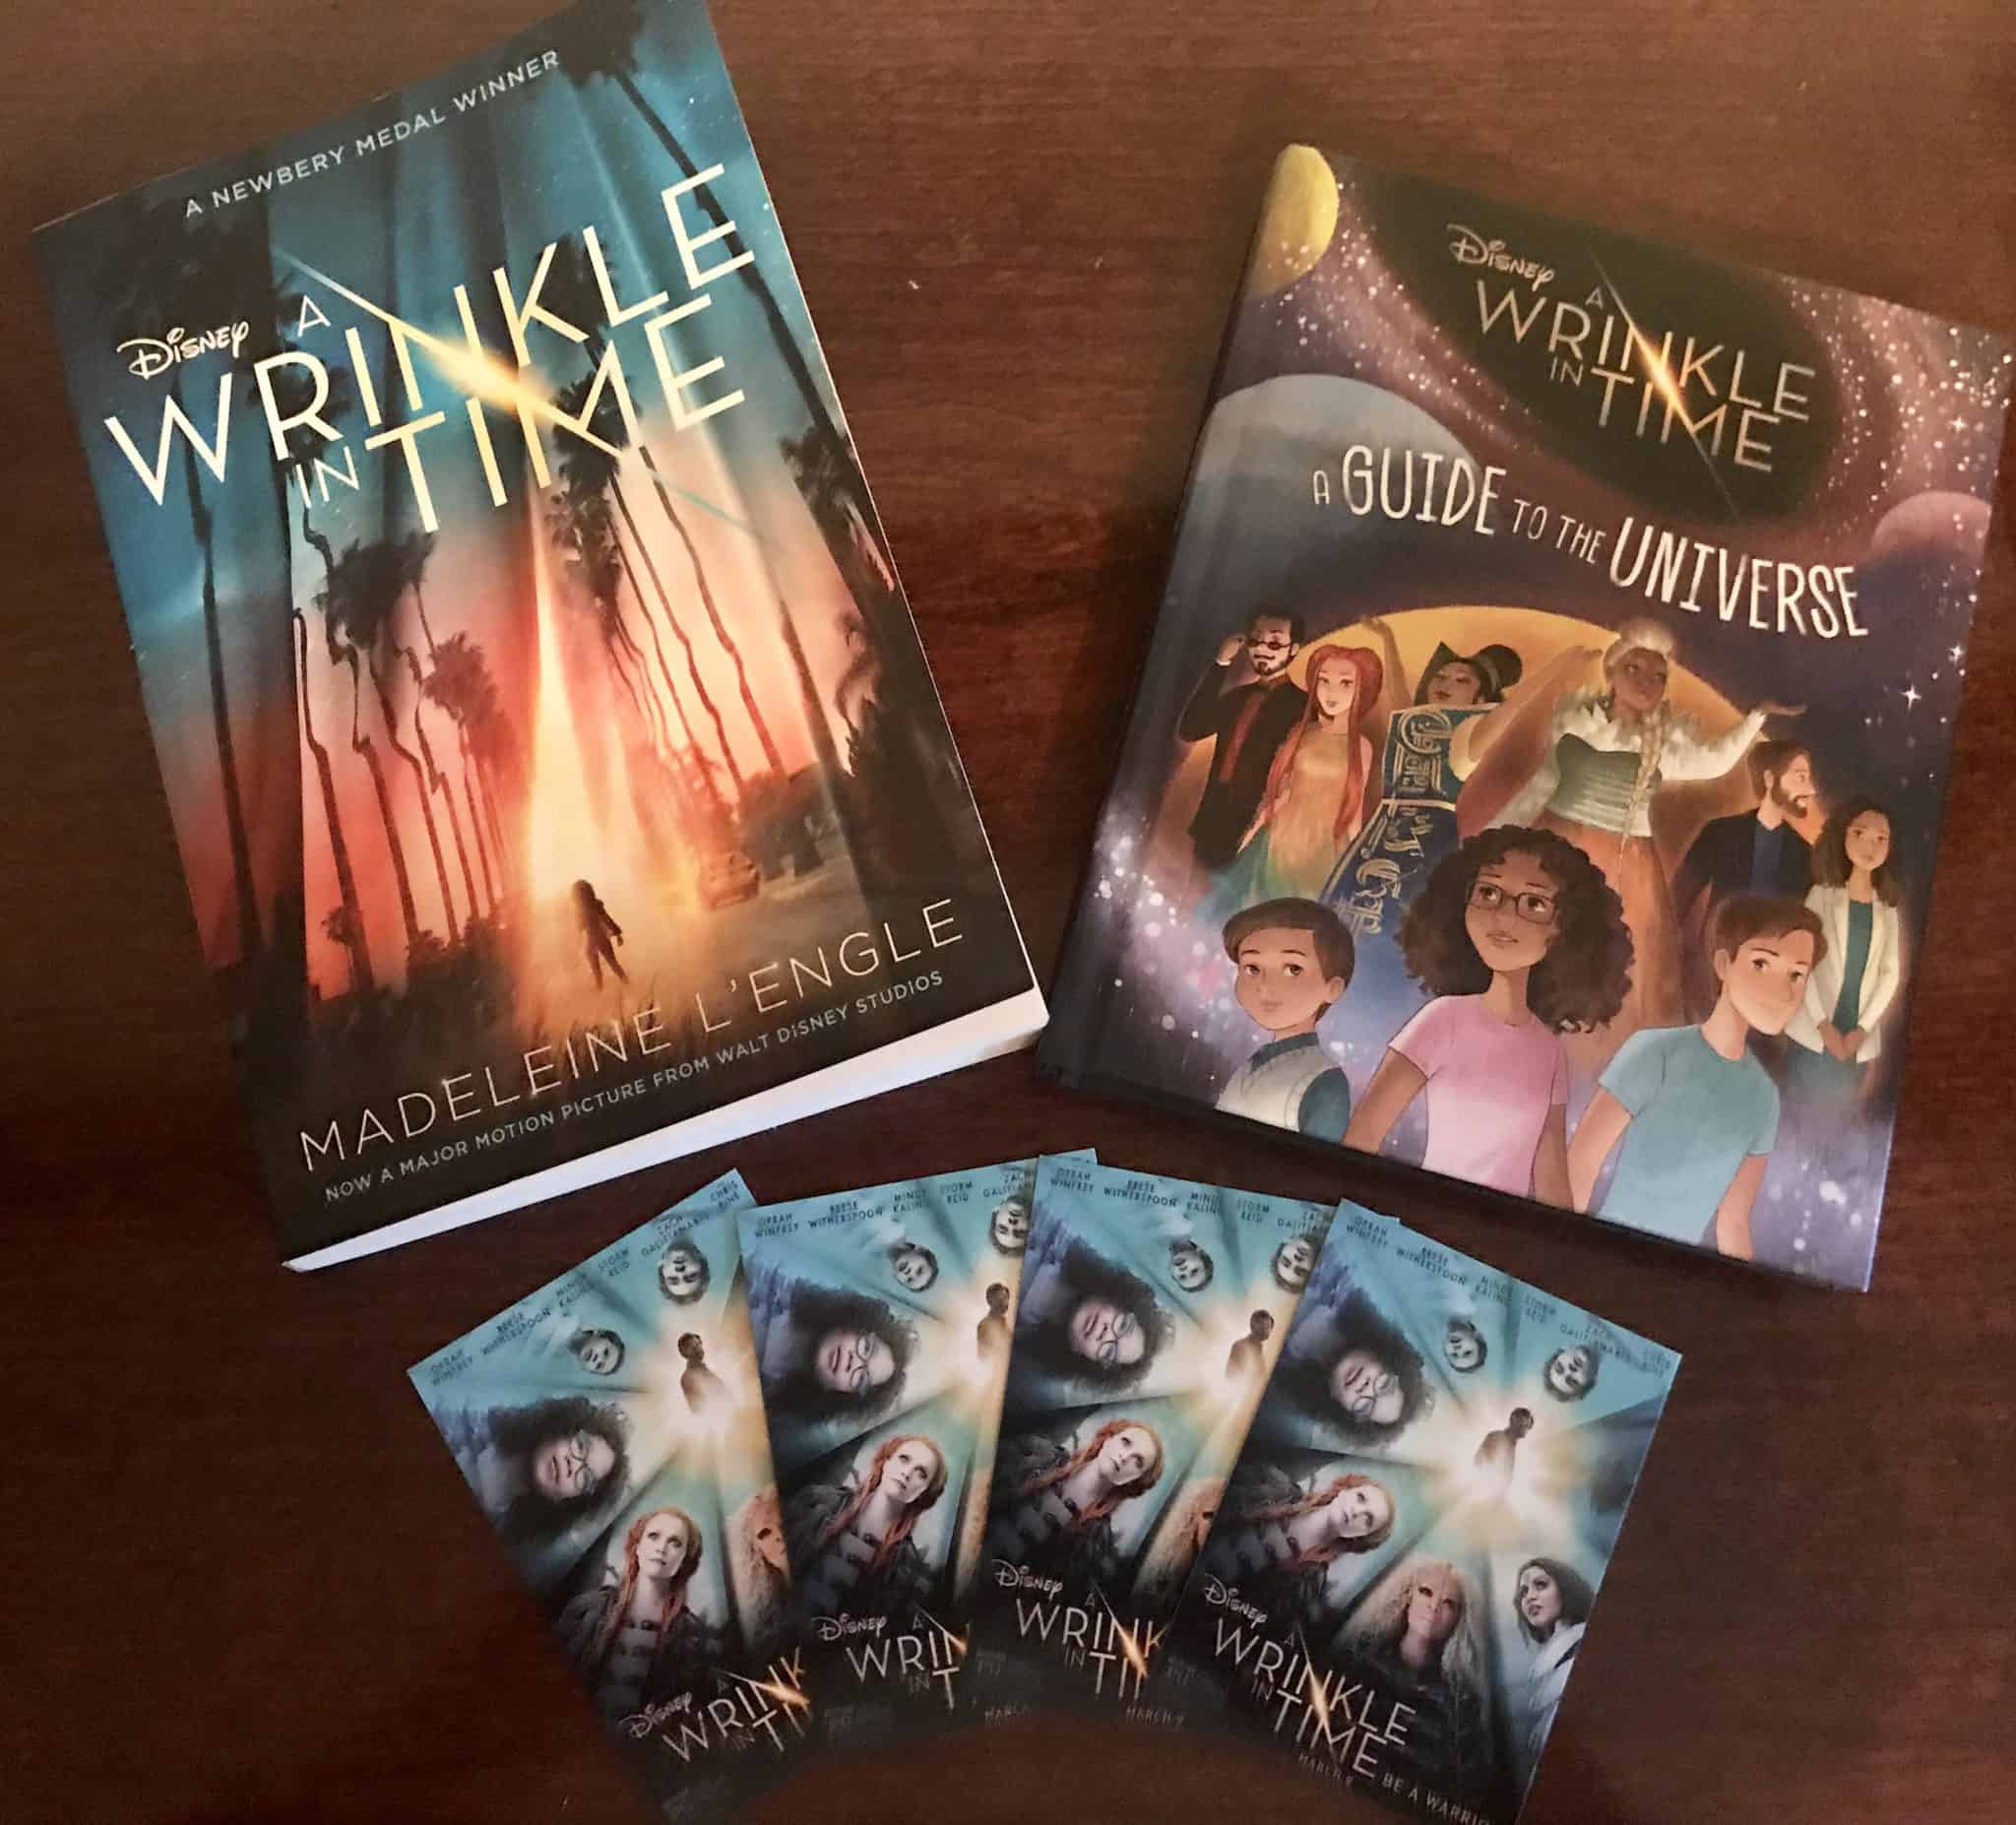 Madeleine L'Engle's A Wrinkle in Time Book, Disney's Wrinkle in Time Guide to the Universe, and 4 Tickets for the Movie